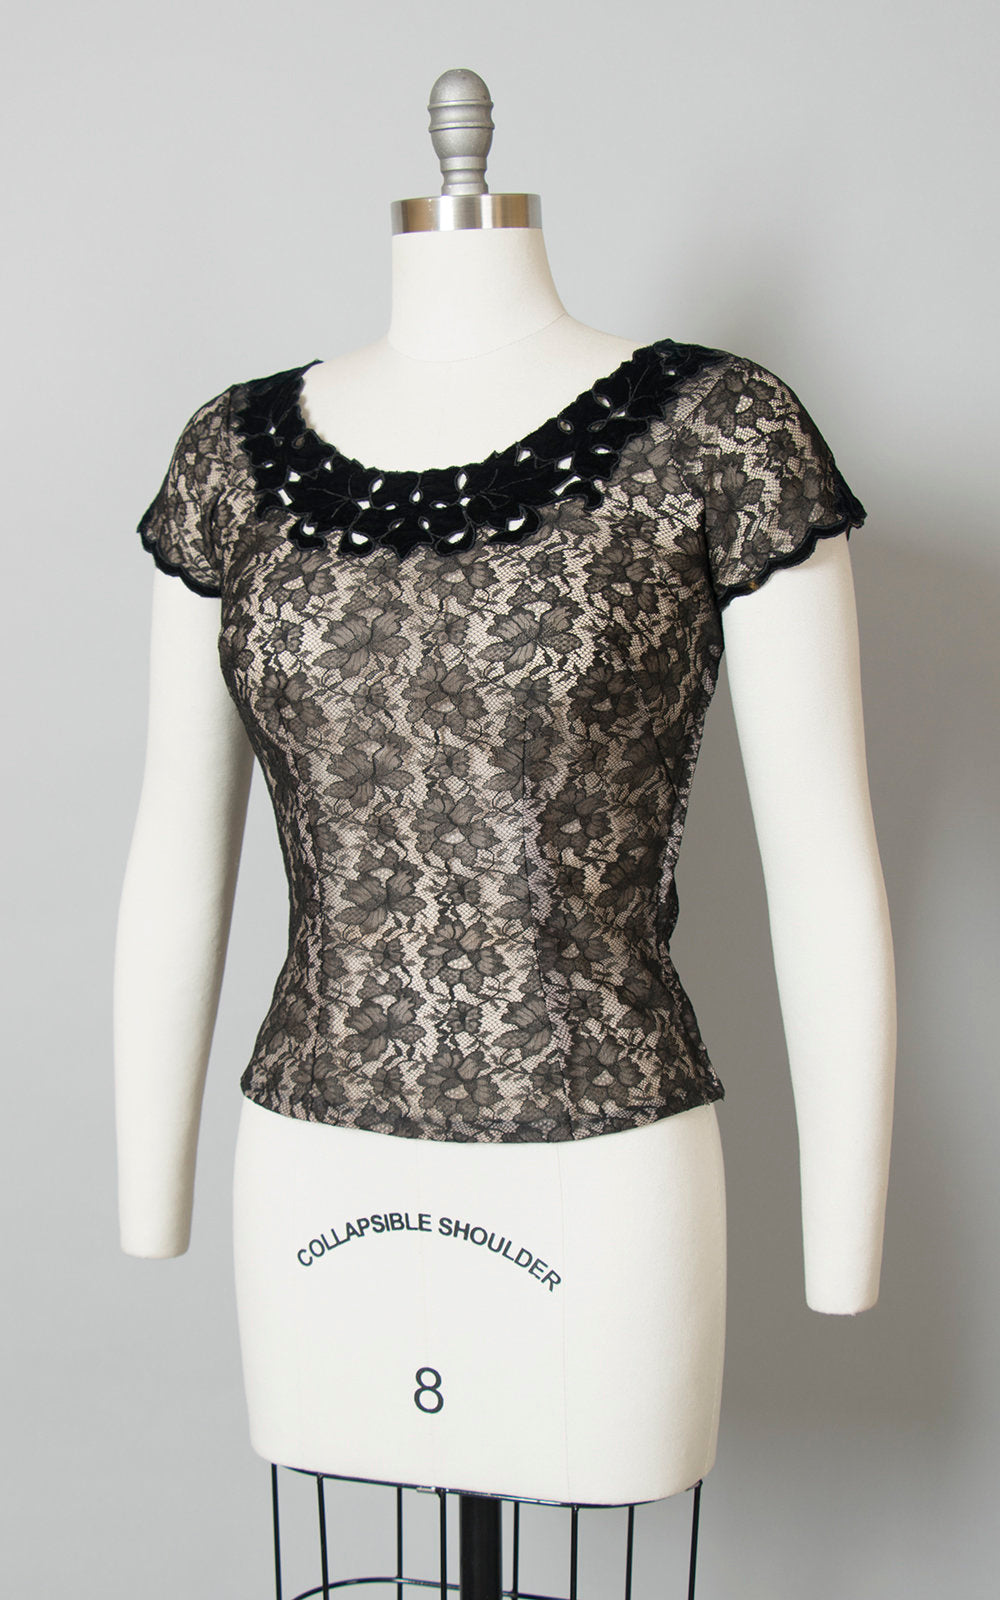 Vintage 1950s Blouse | 50s Black Lace Sheer Nude Illusion Top w/ Cutout Velvet Leaves (small)